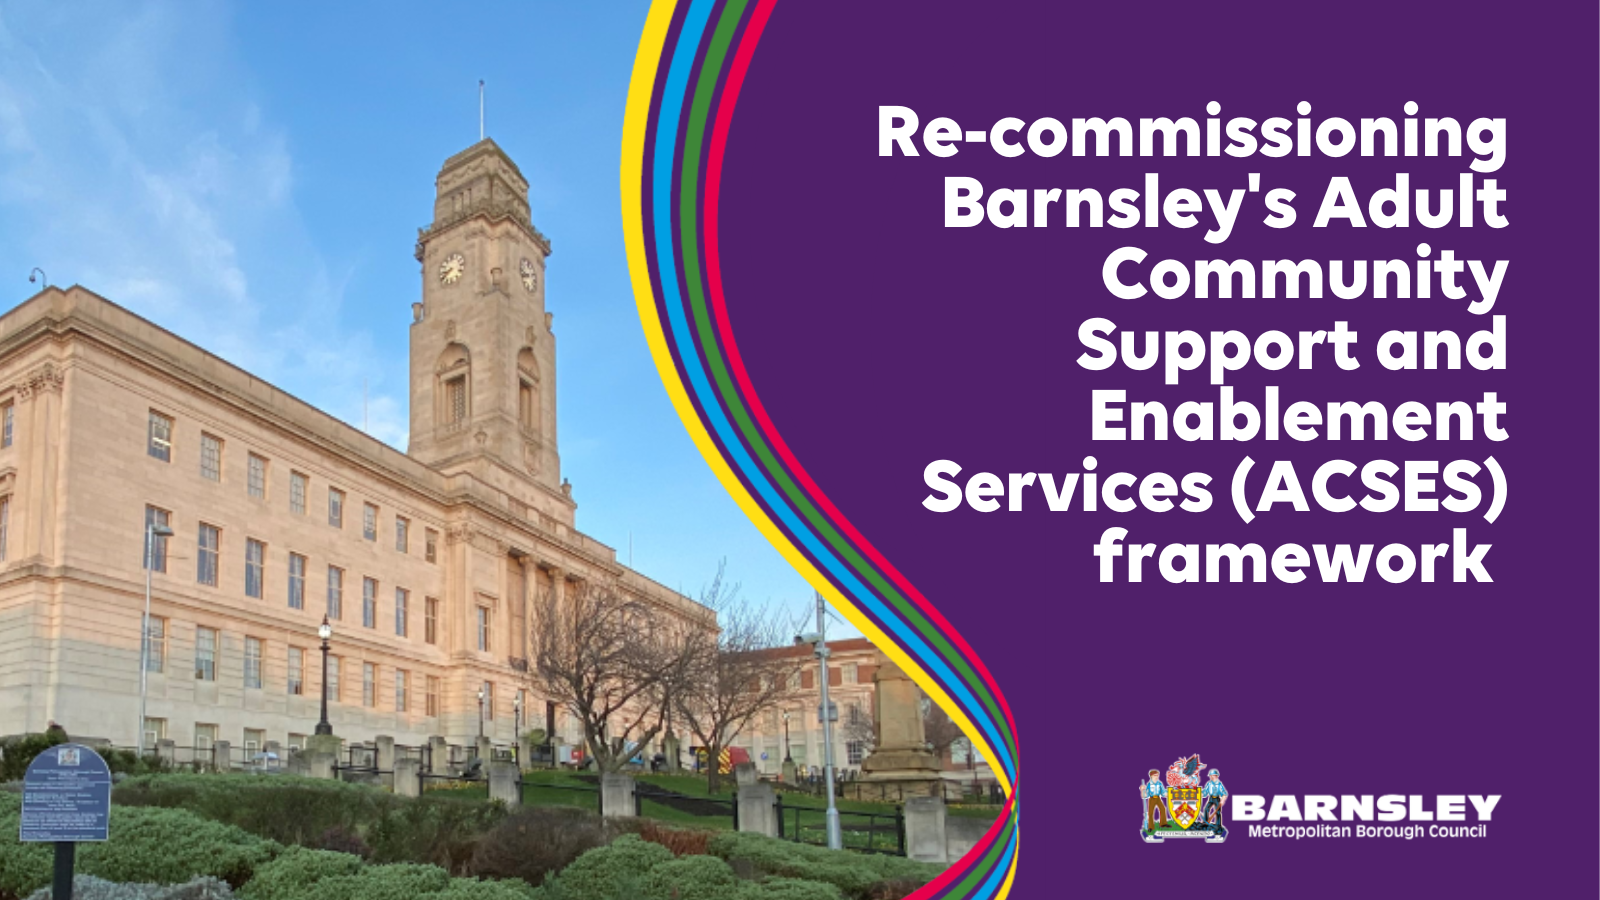 Re-commissioning Barnsley's Adult Community Support and Enablement Services (ACSES) framework